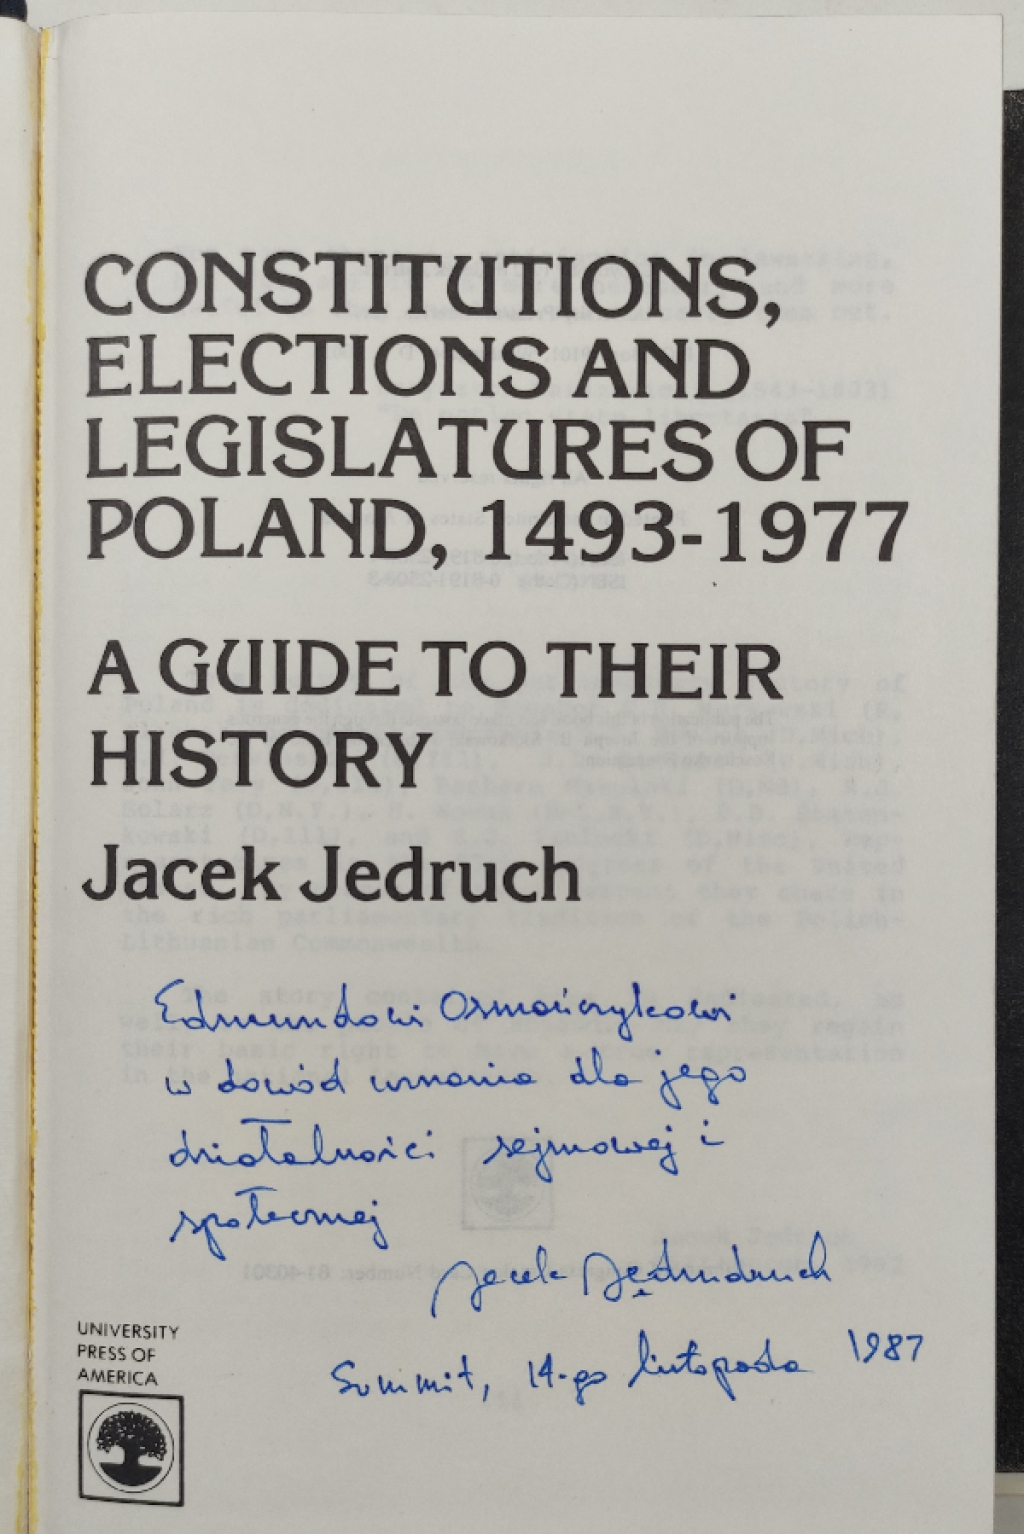 Constitutions, elections and legislatures of Poland, 1493-1977. A Guide to Their History [dedykacja]